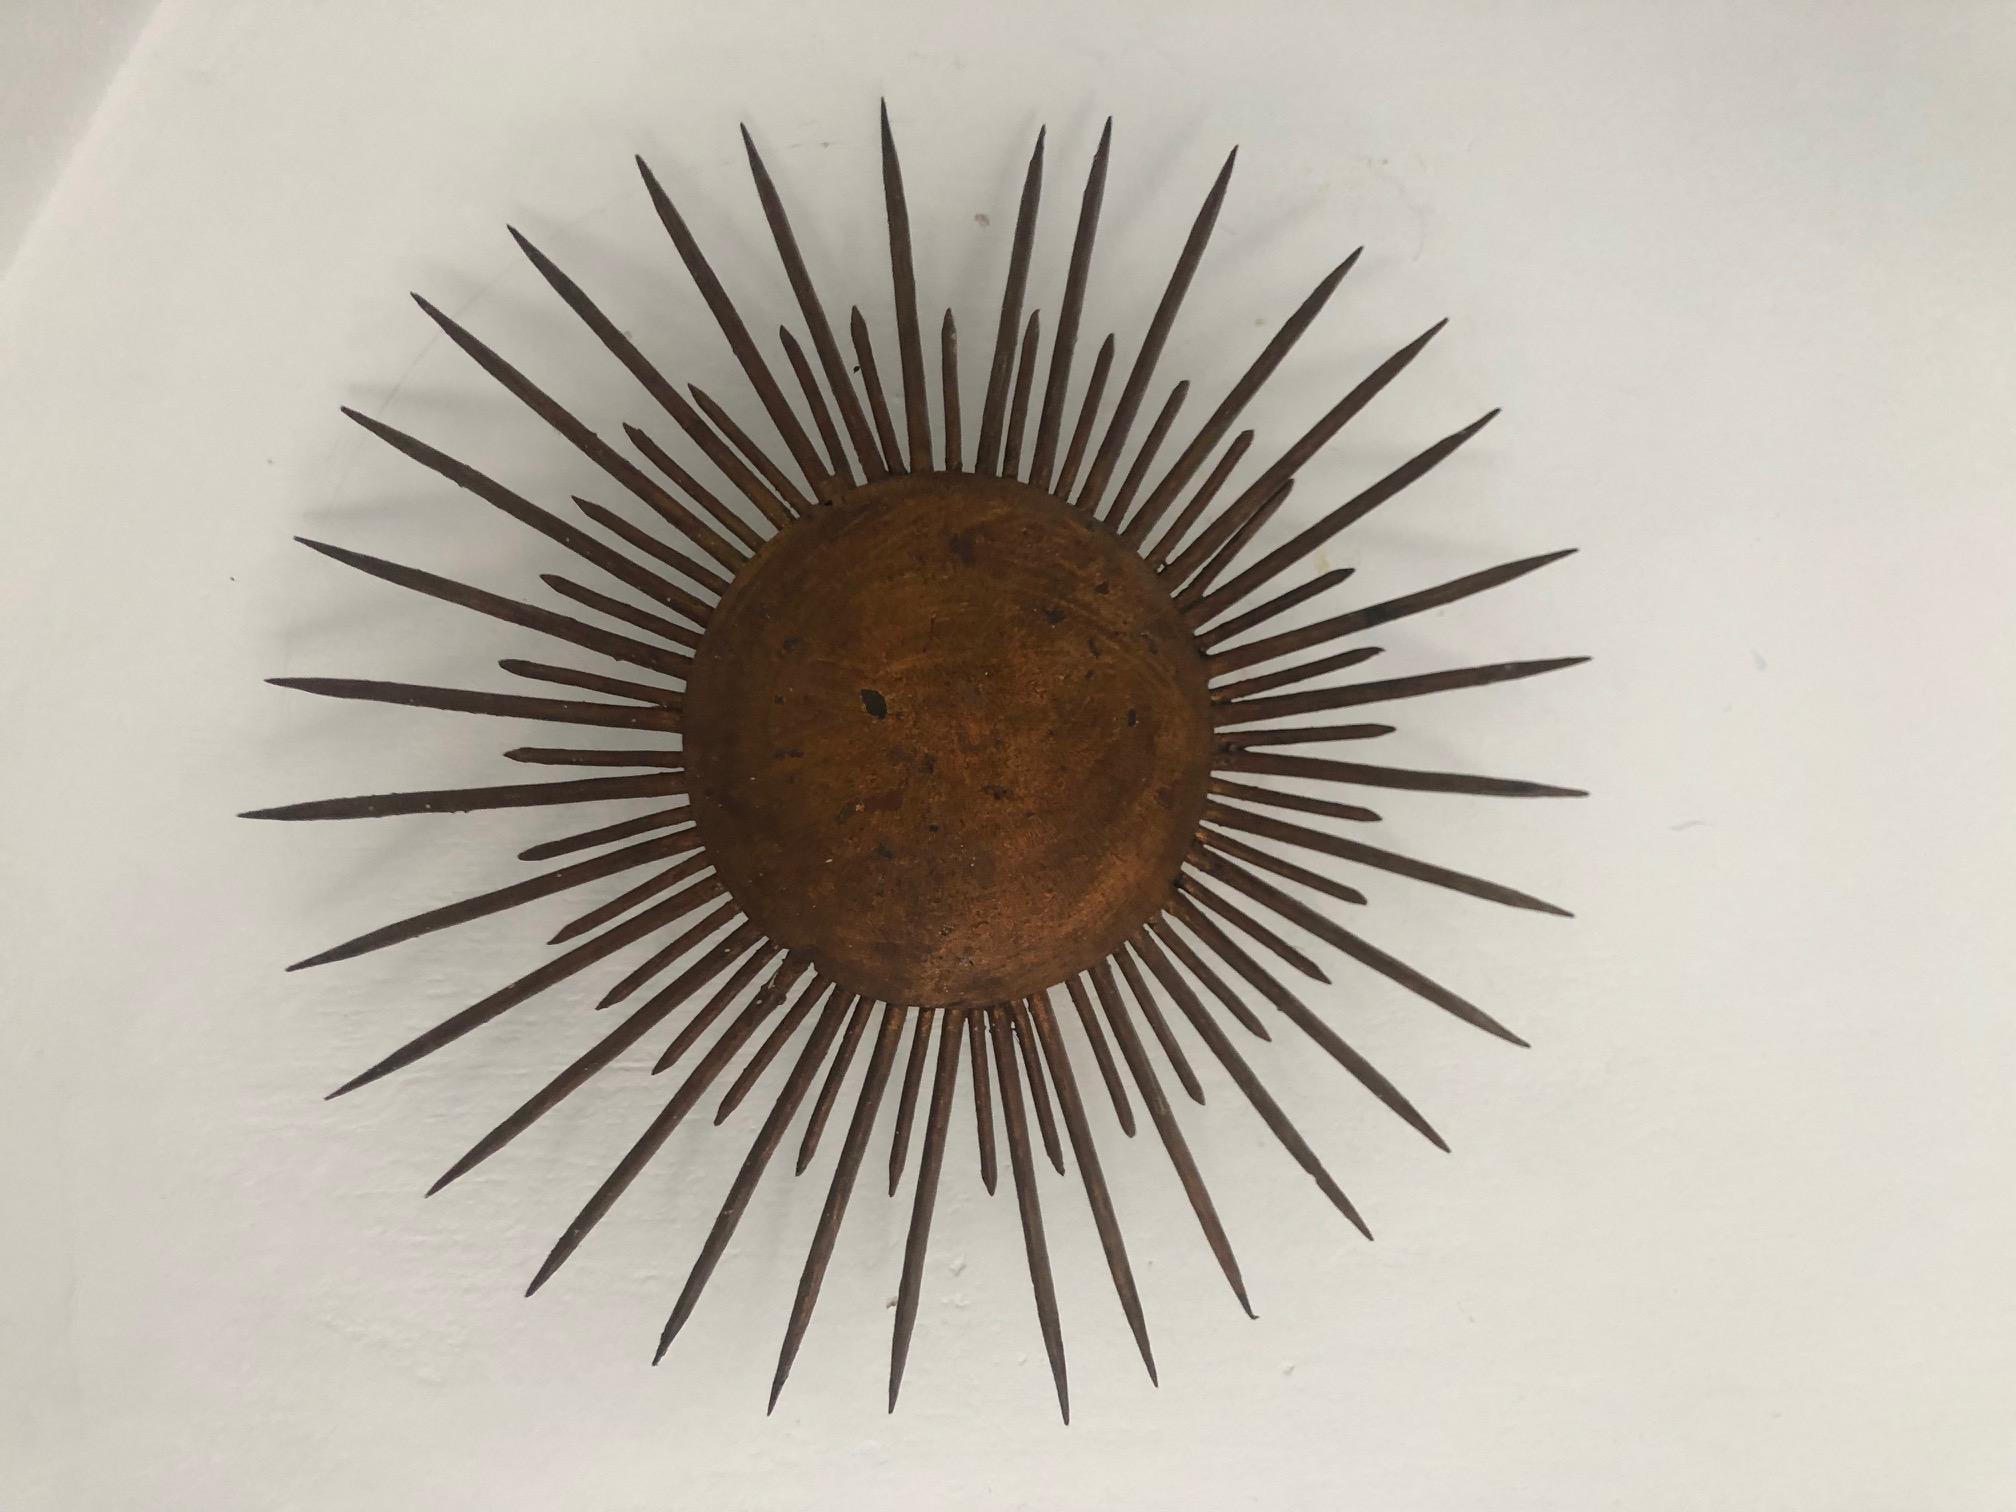 Pair of fully functional repurposed metal sunburst wall sconces with faded gilt finish. Have an industrial feel but elegant at the same time. Striking and unusual and very impactful effect when lighting.